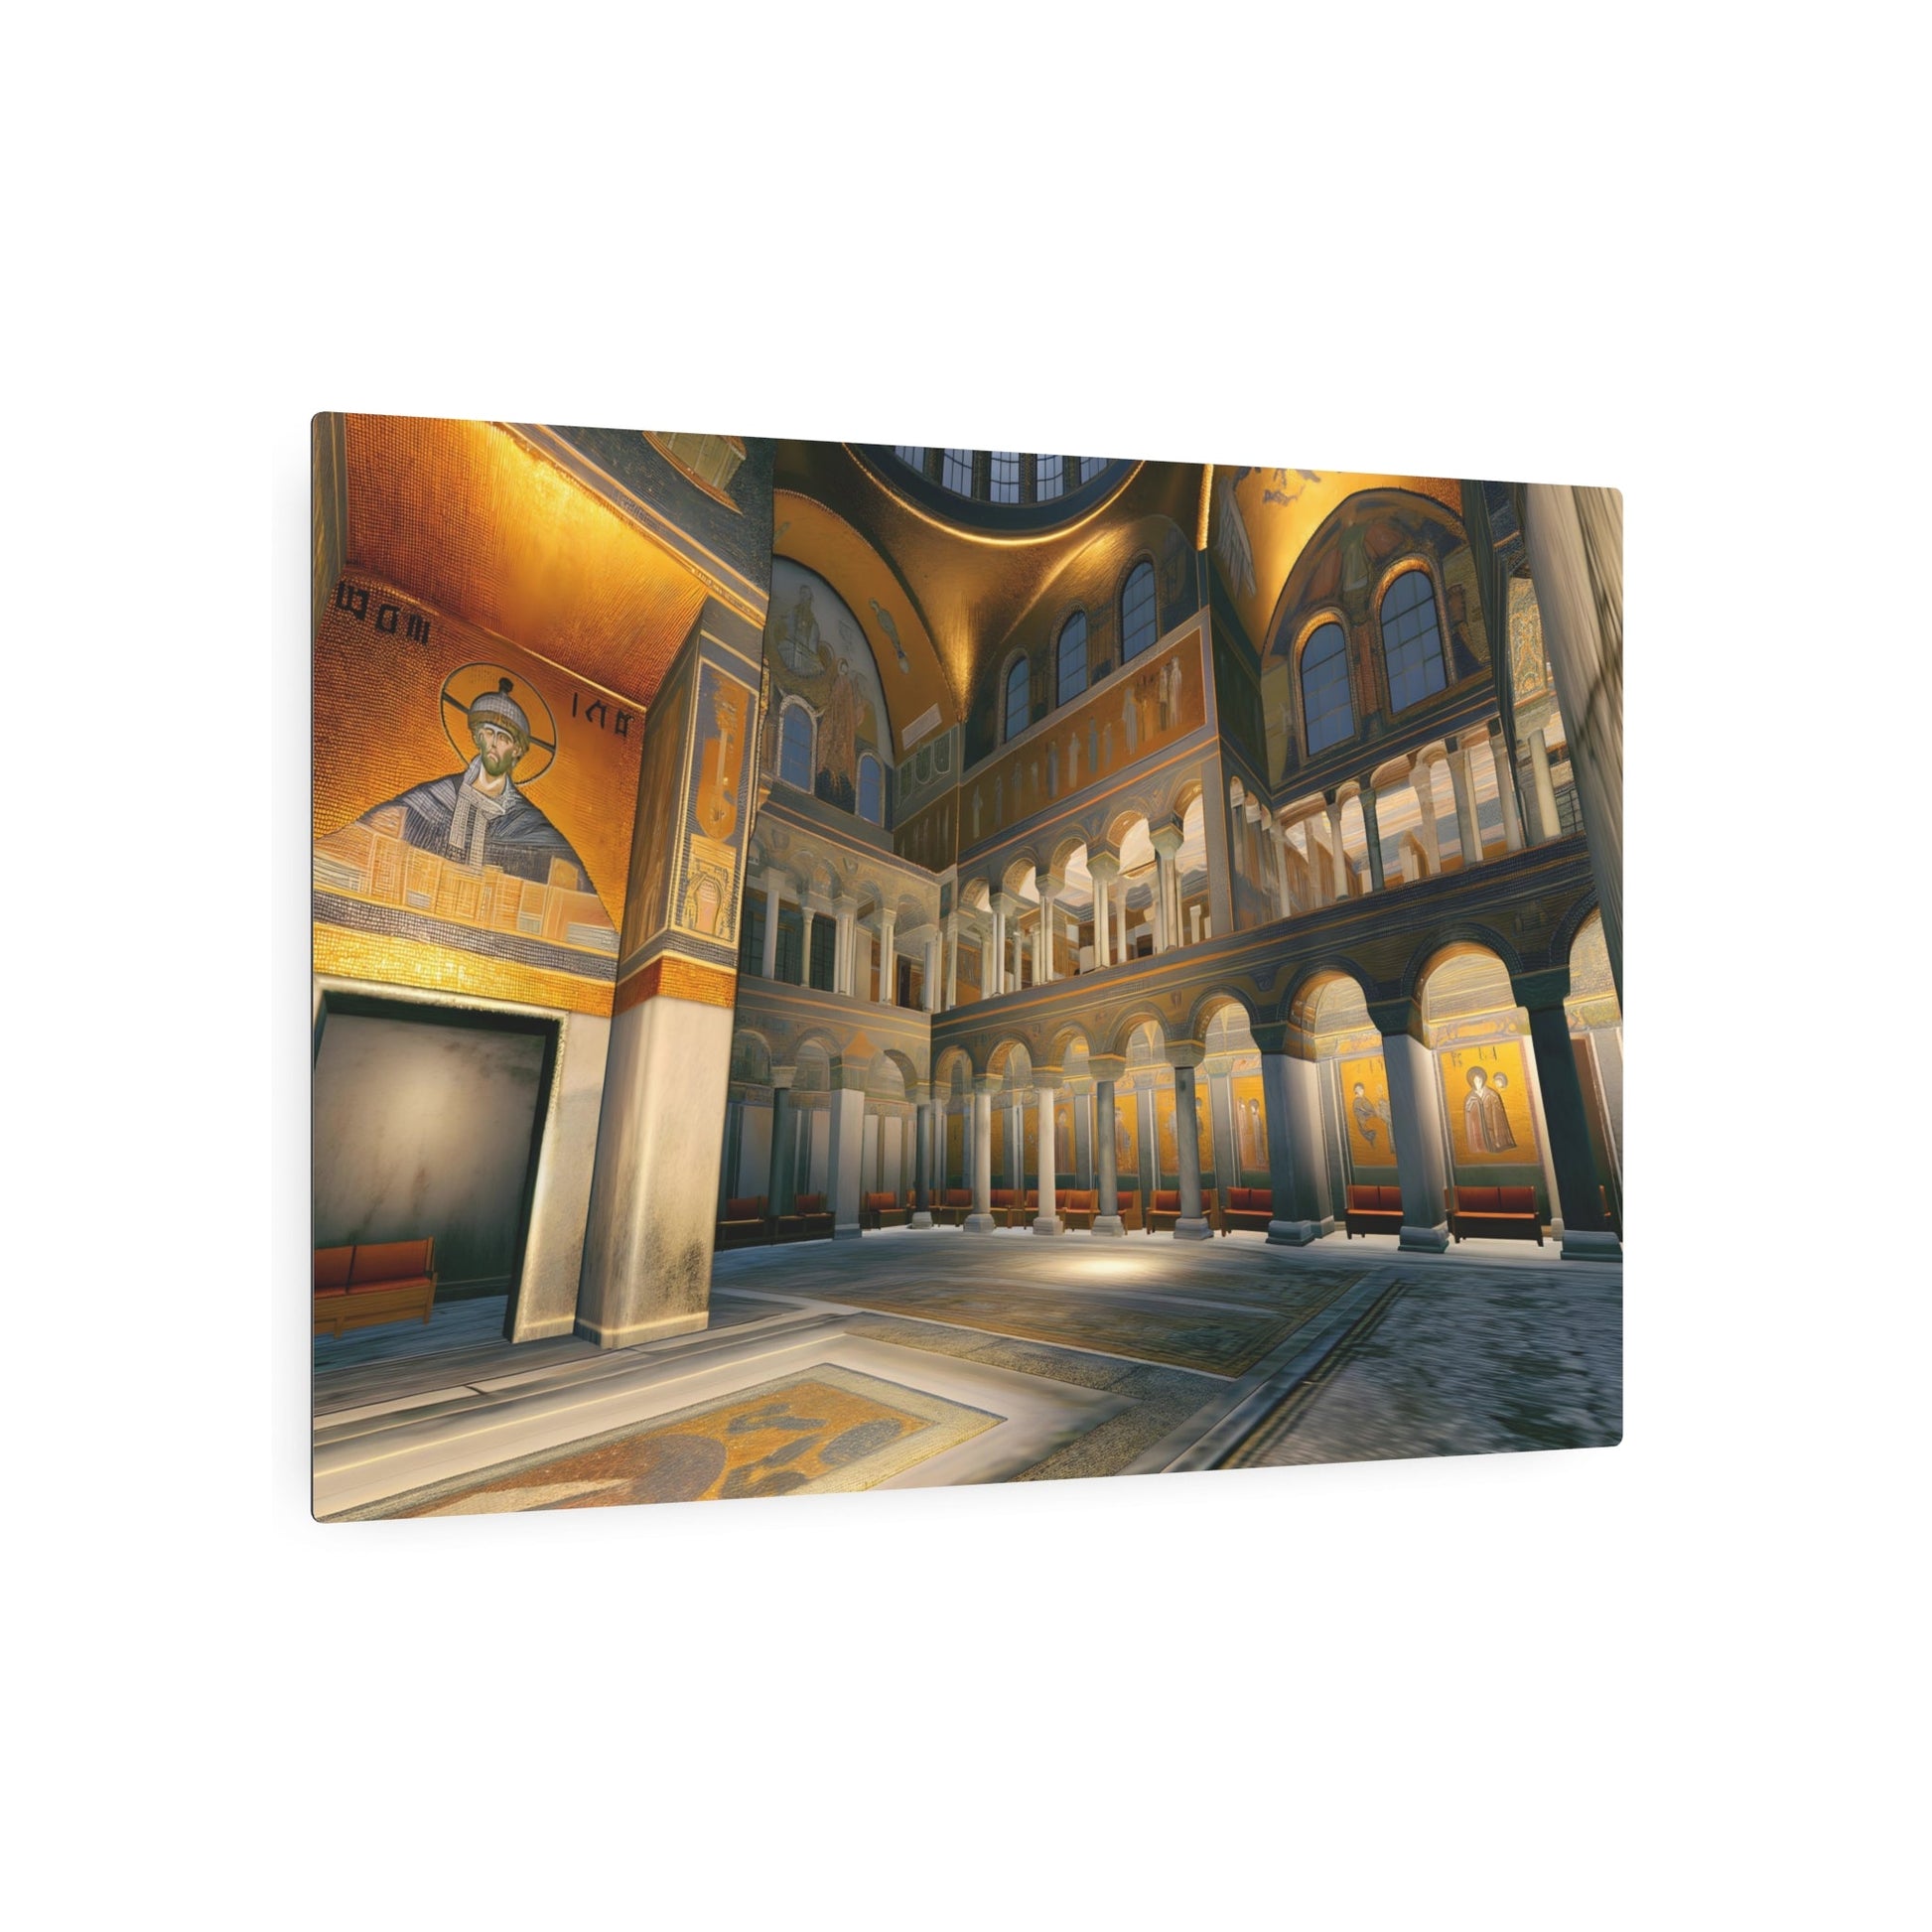 Metal Poster Art | "Byzantine Art Print - Grand Royal Court of Byzantine Empire with Elaborate Gold Details, Intricate Mosaics and Architectural Features - Metal Poster Art 36″ x 24″ (Horizontal) 0.12''